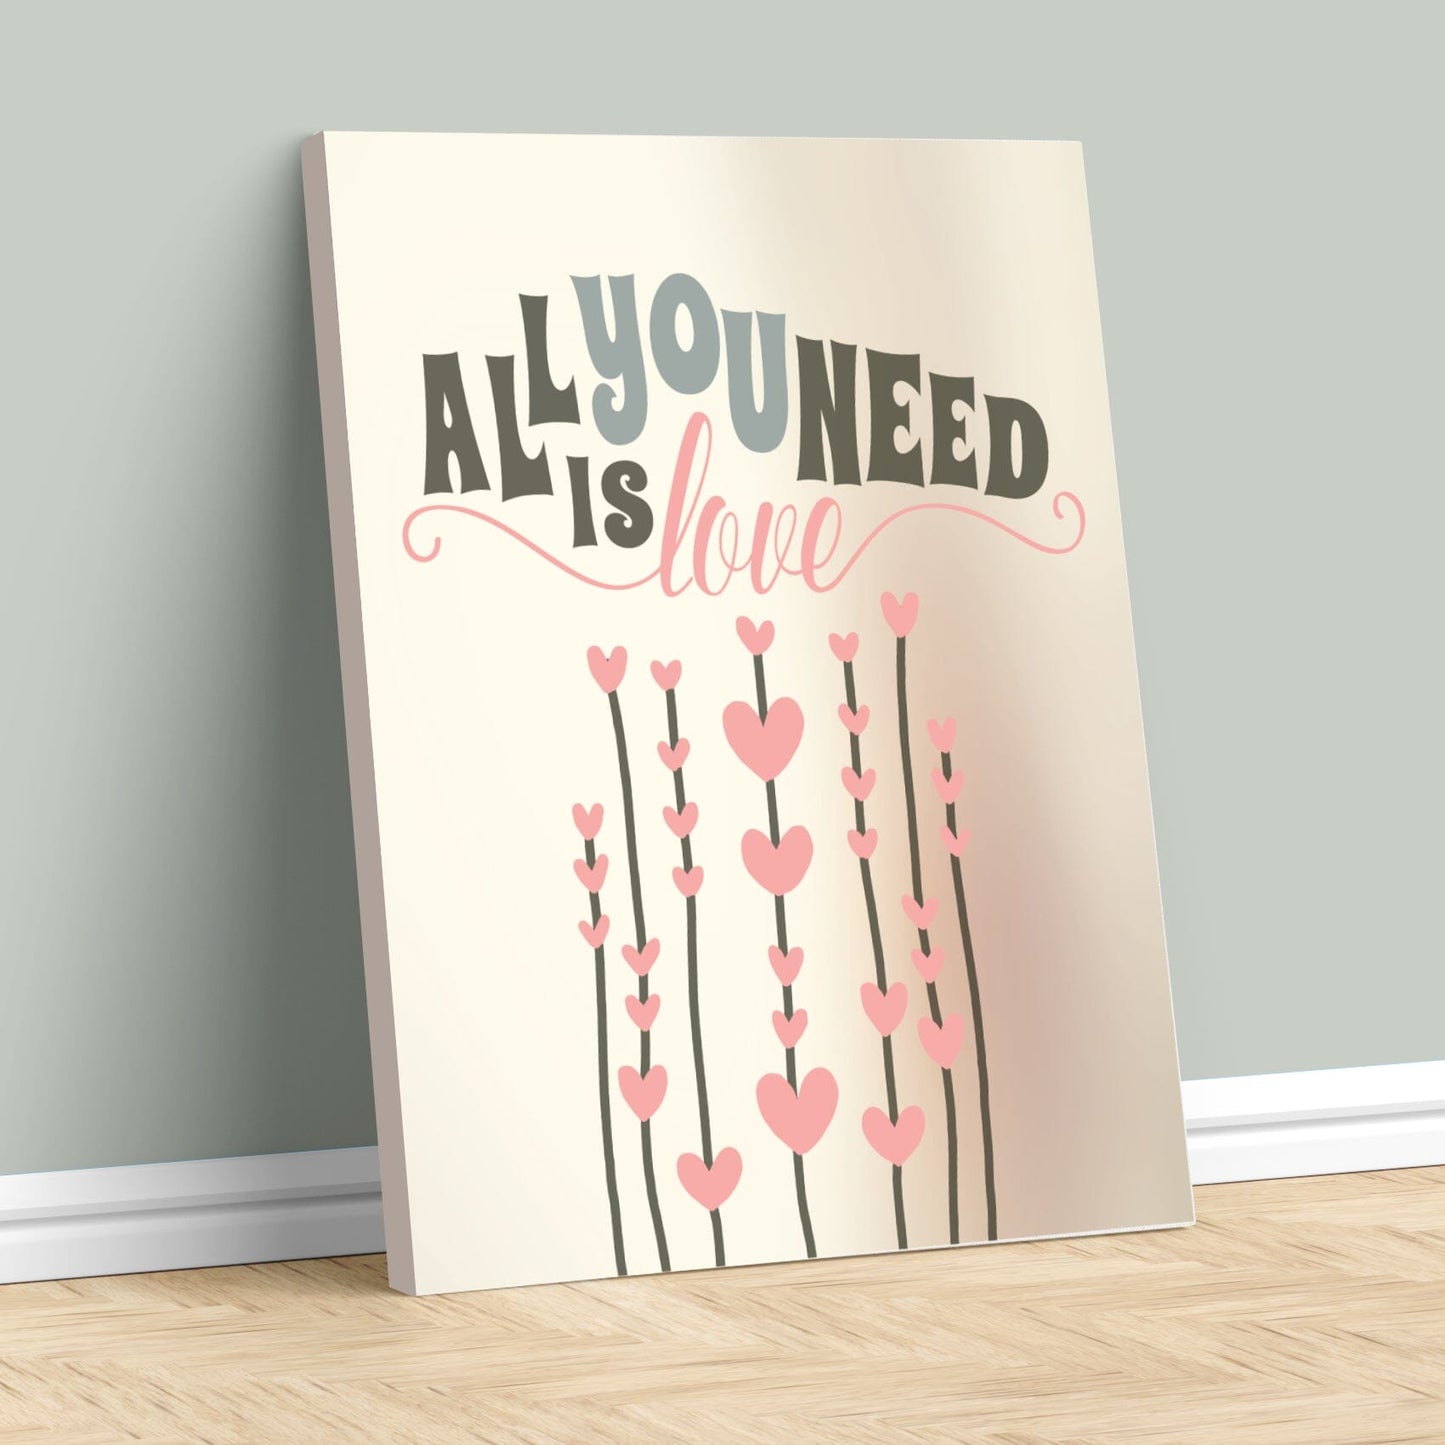 All You Need is Love by the Beatles - Song Lyric Art Print Song Lyrics Art Song Lyrics Art 11x14 Canvas Wrap 